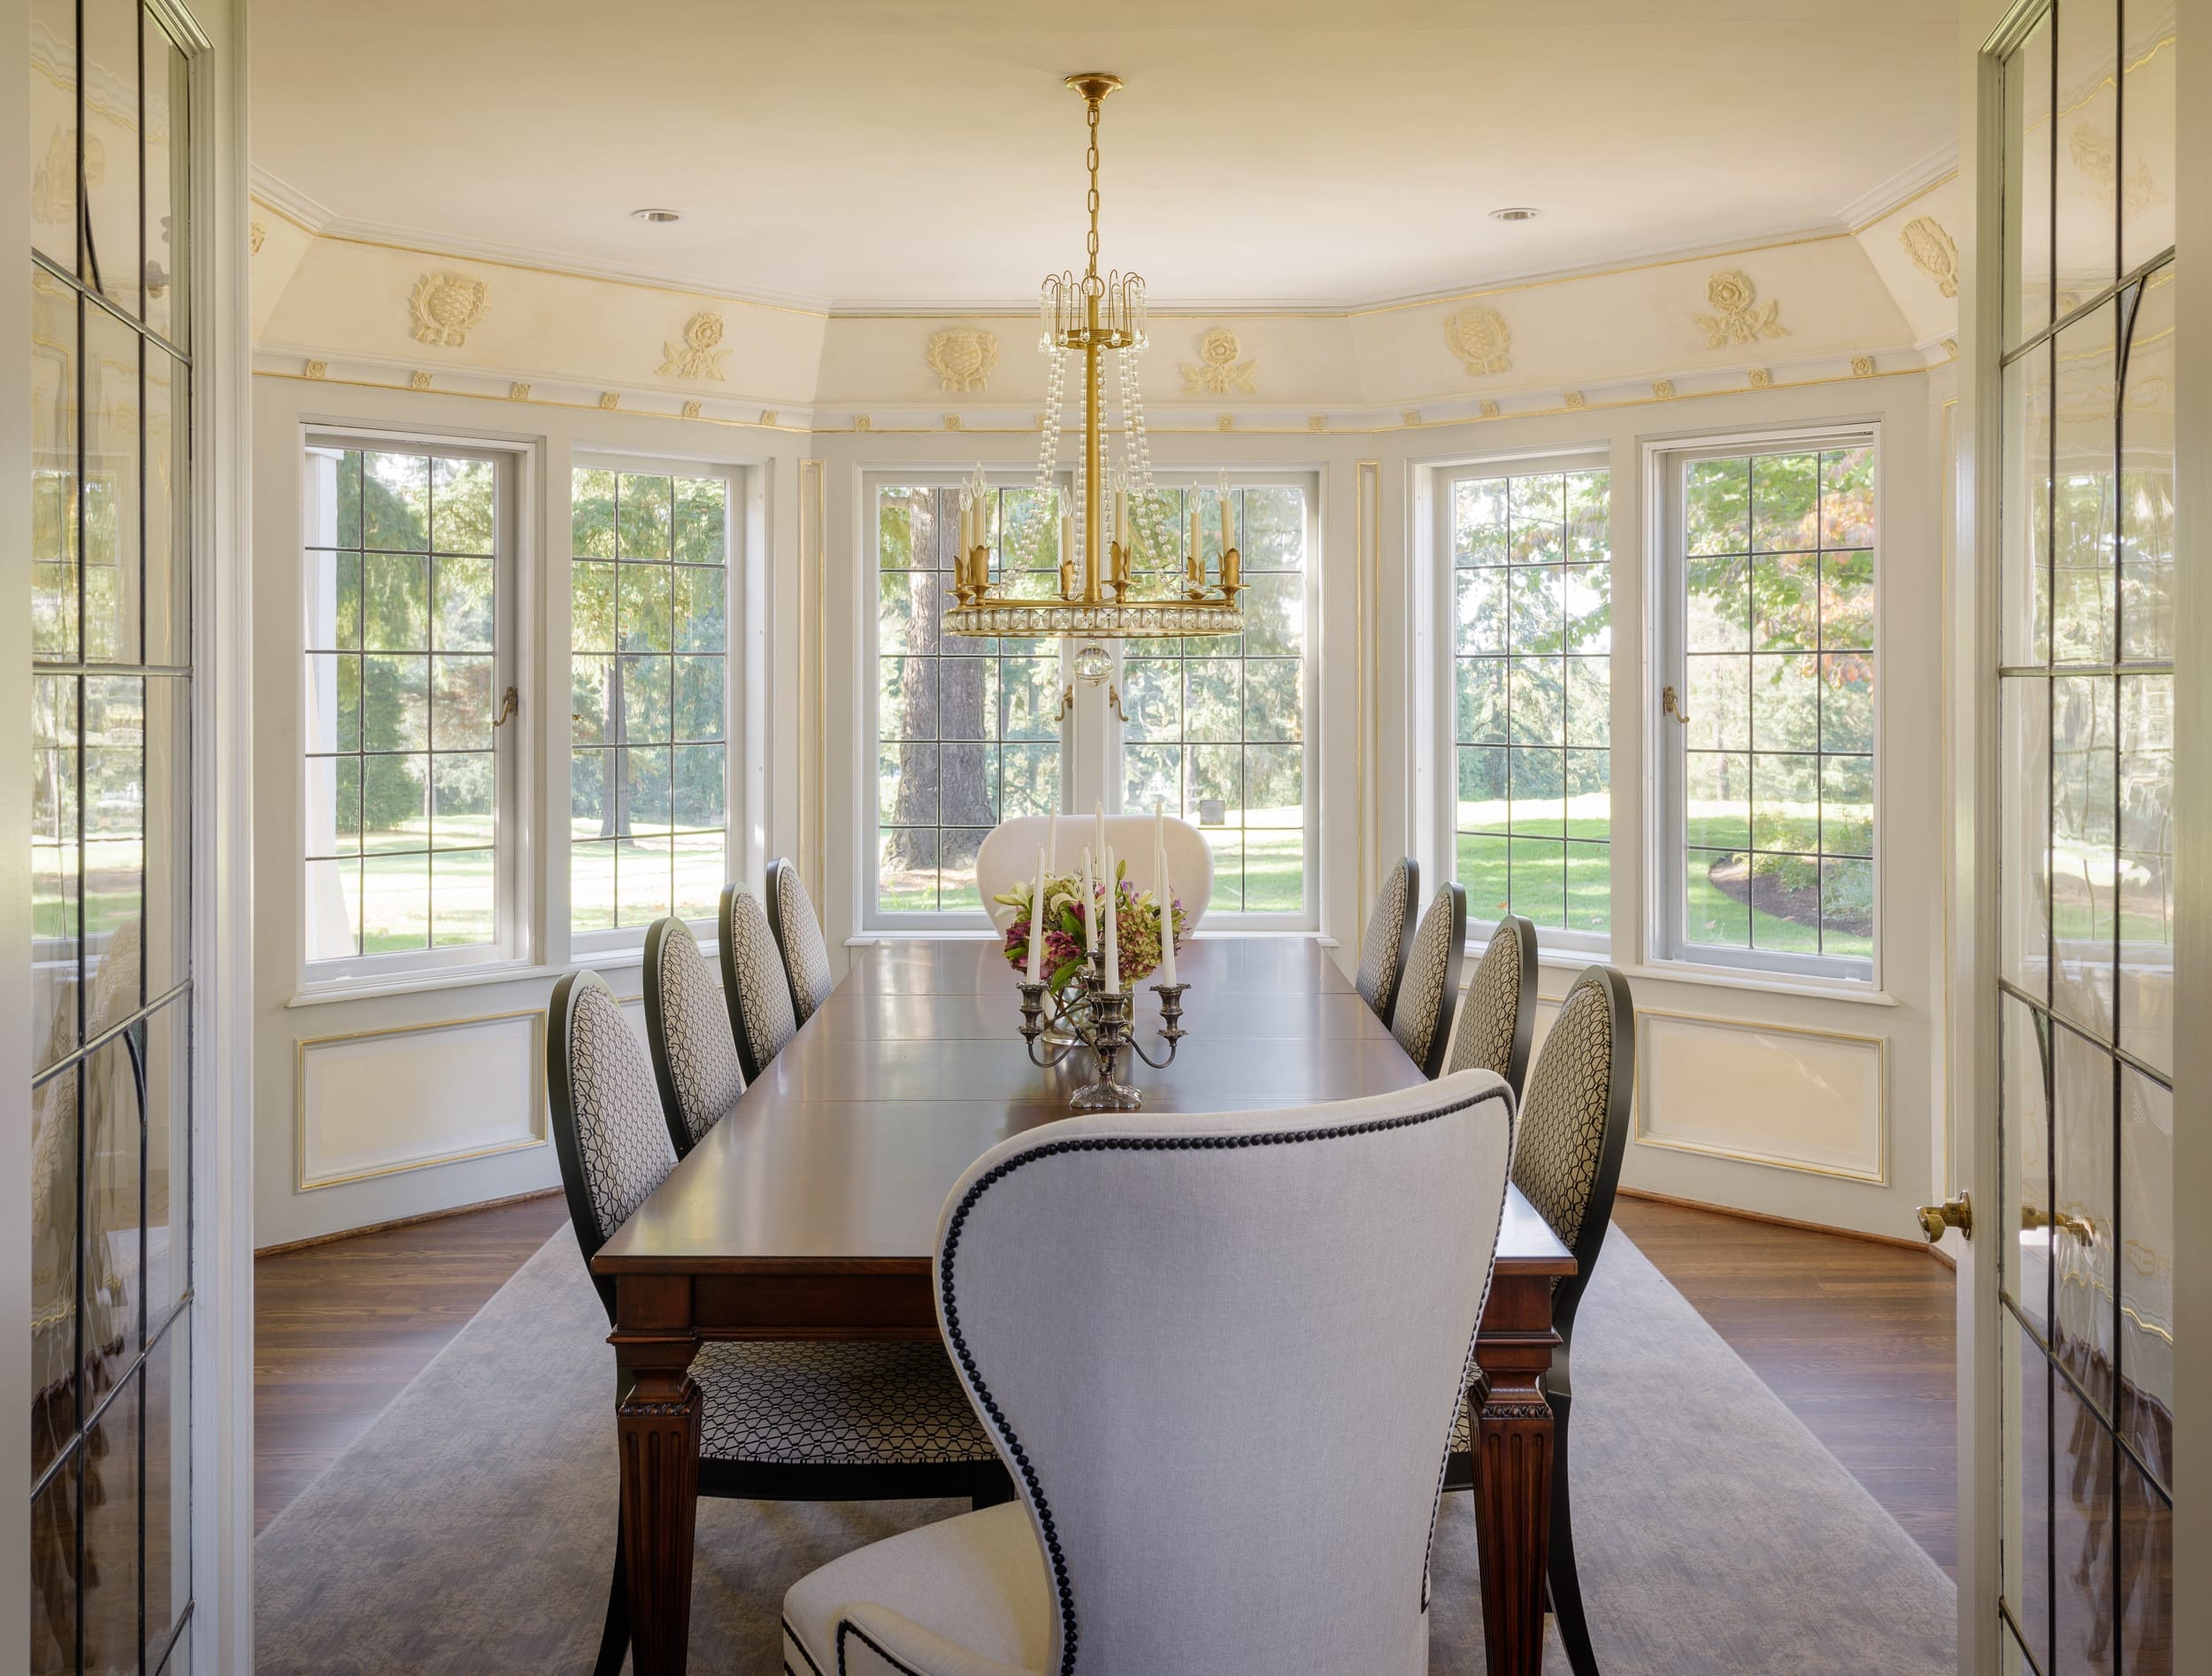 A dining room with a chandelier and chairs.